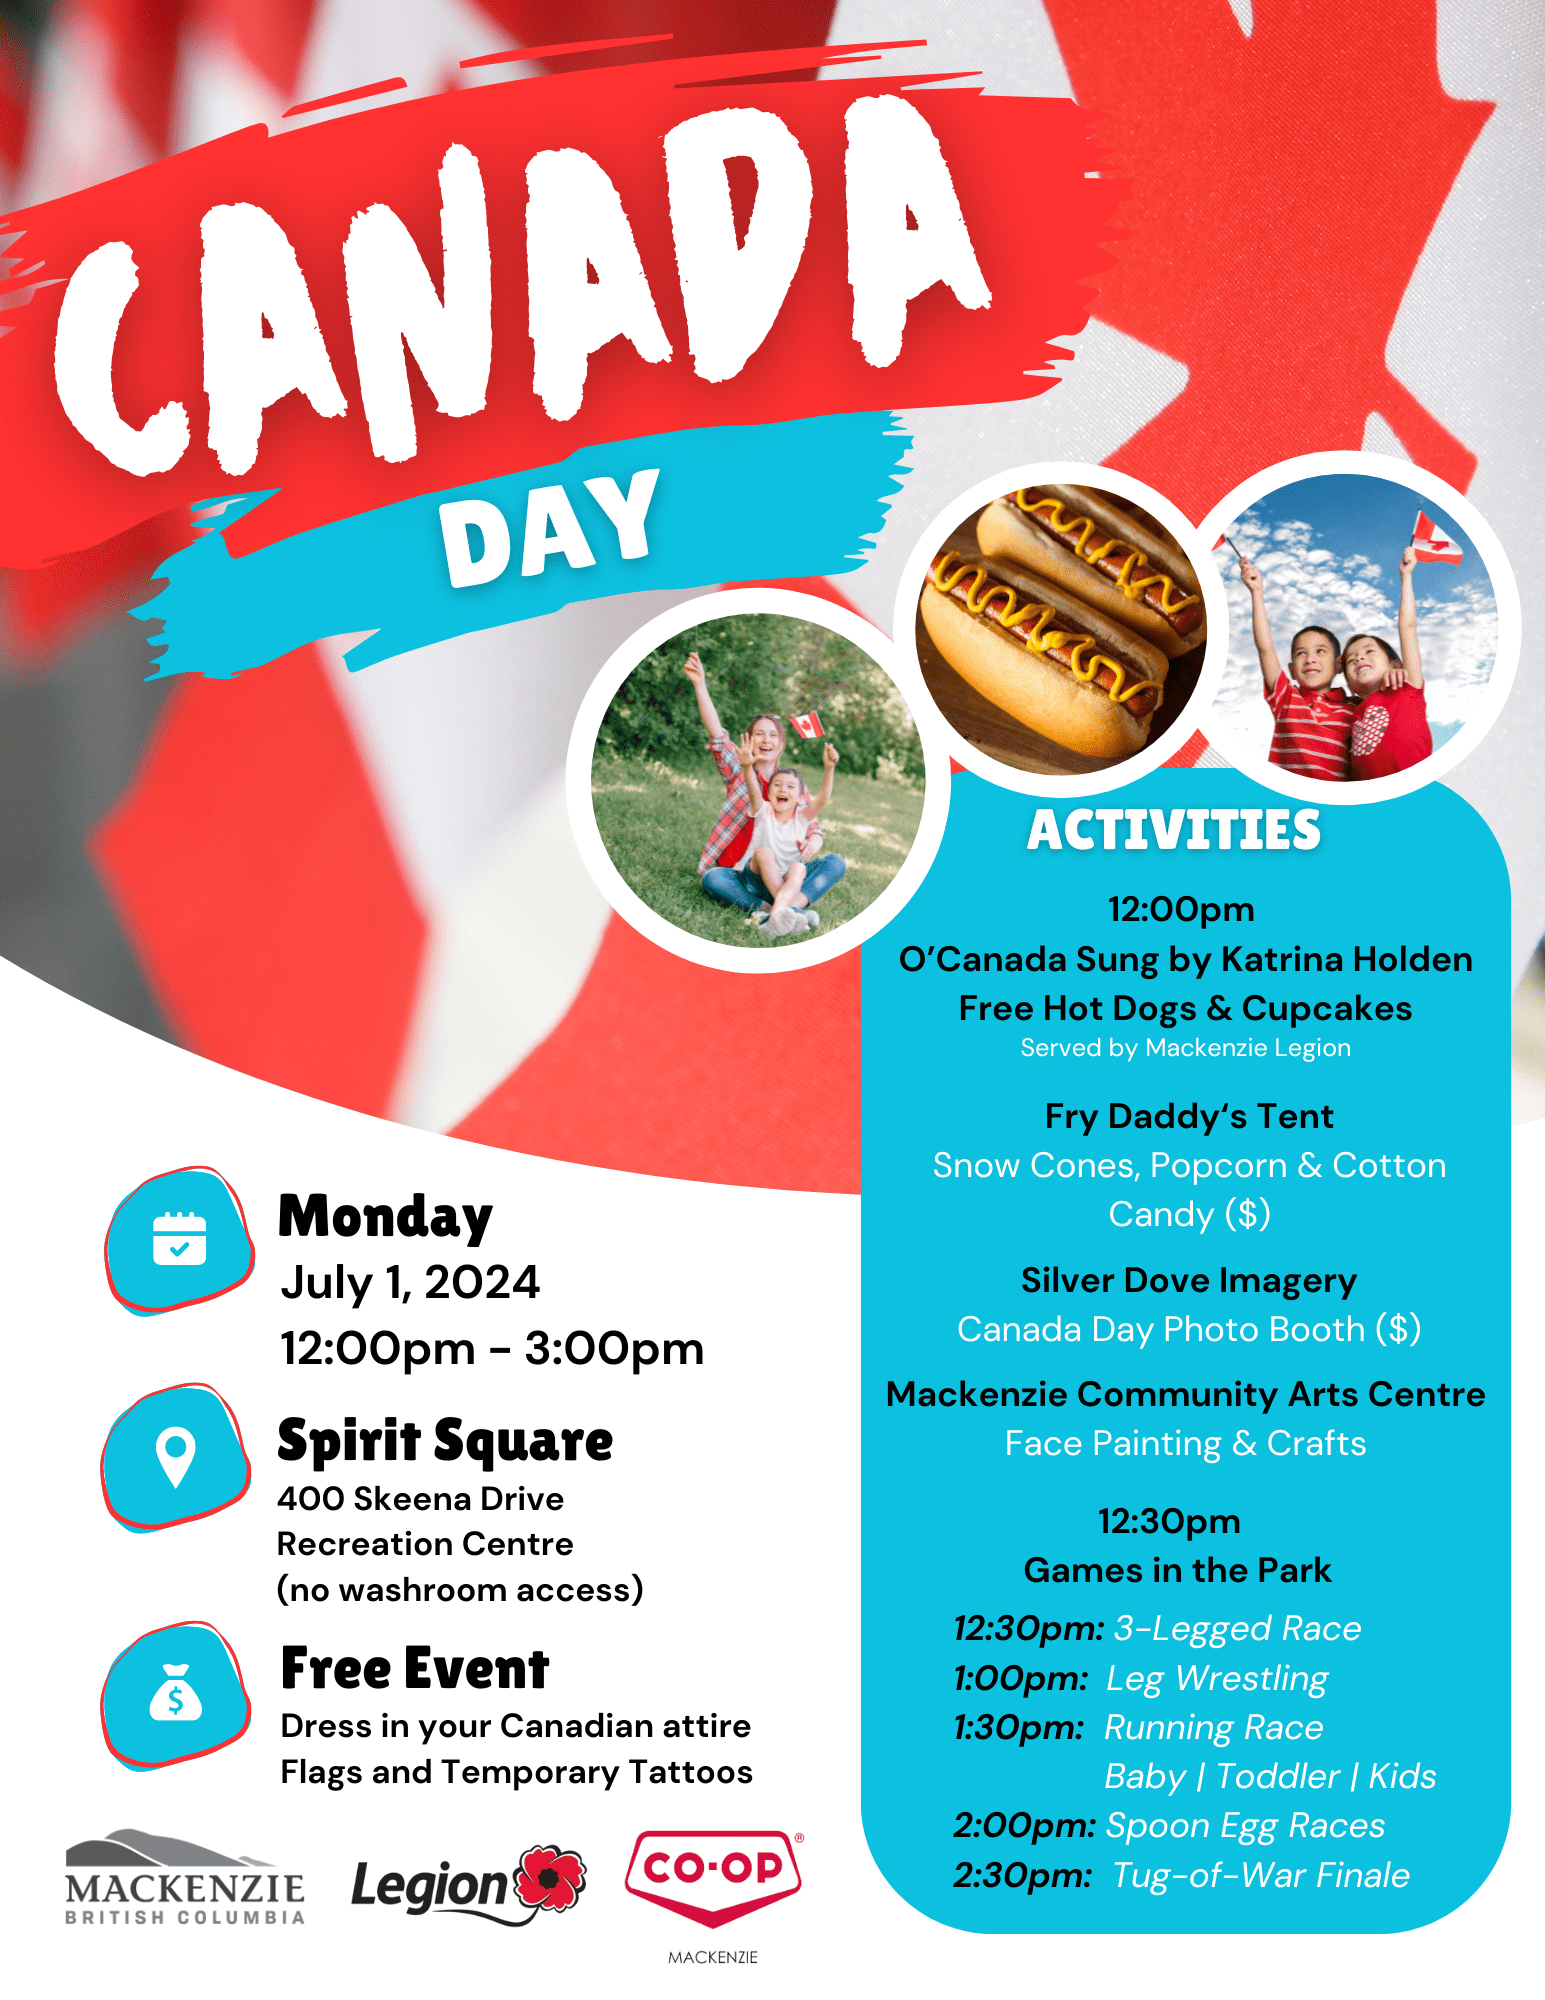 Canada Day - Monday, July 1